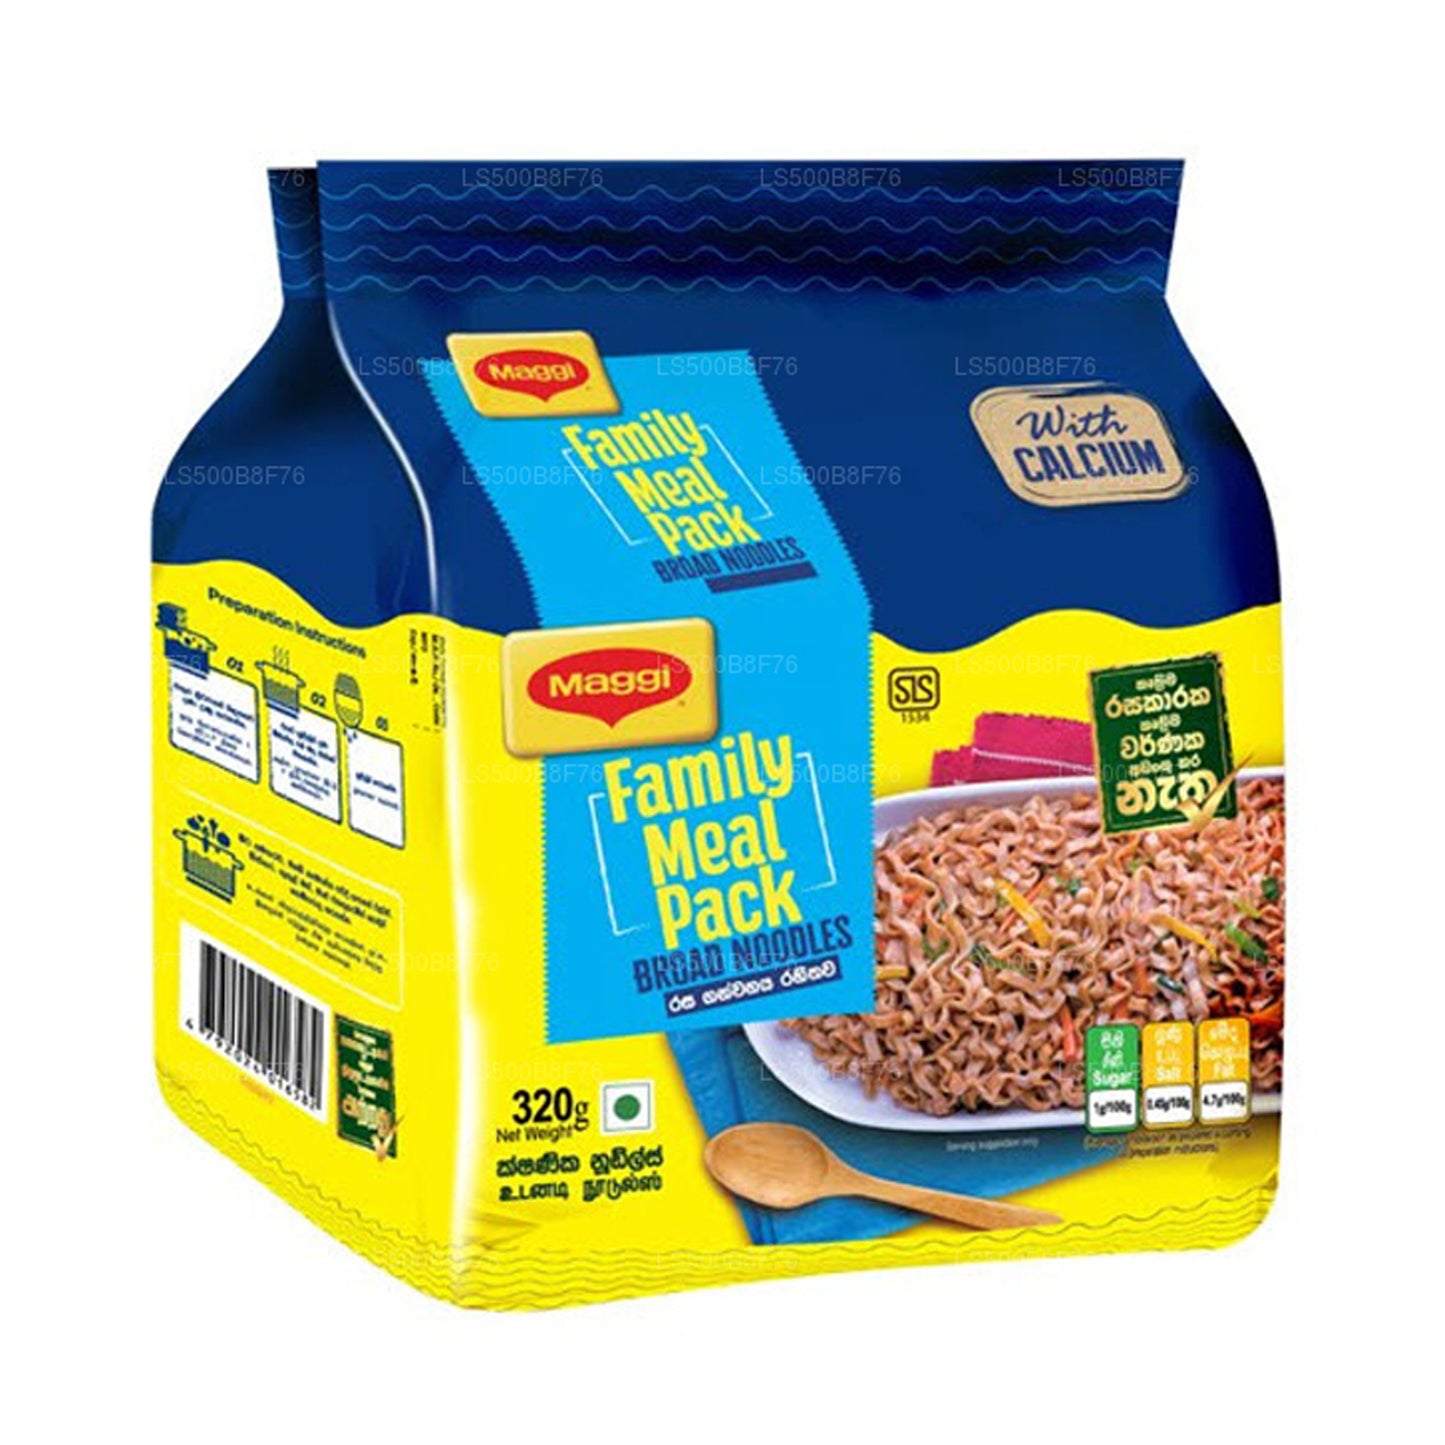 Maggi Family Meal Pack Breitnudeln (320 g)